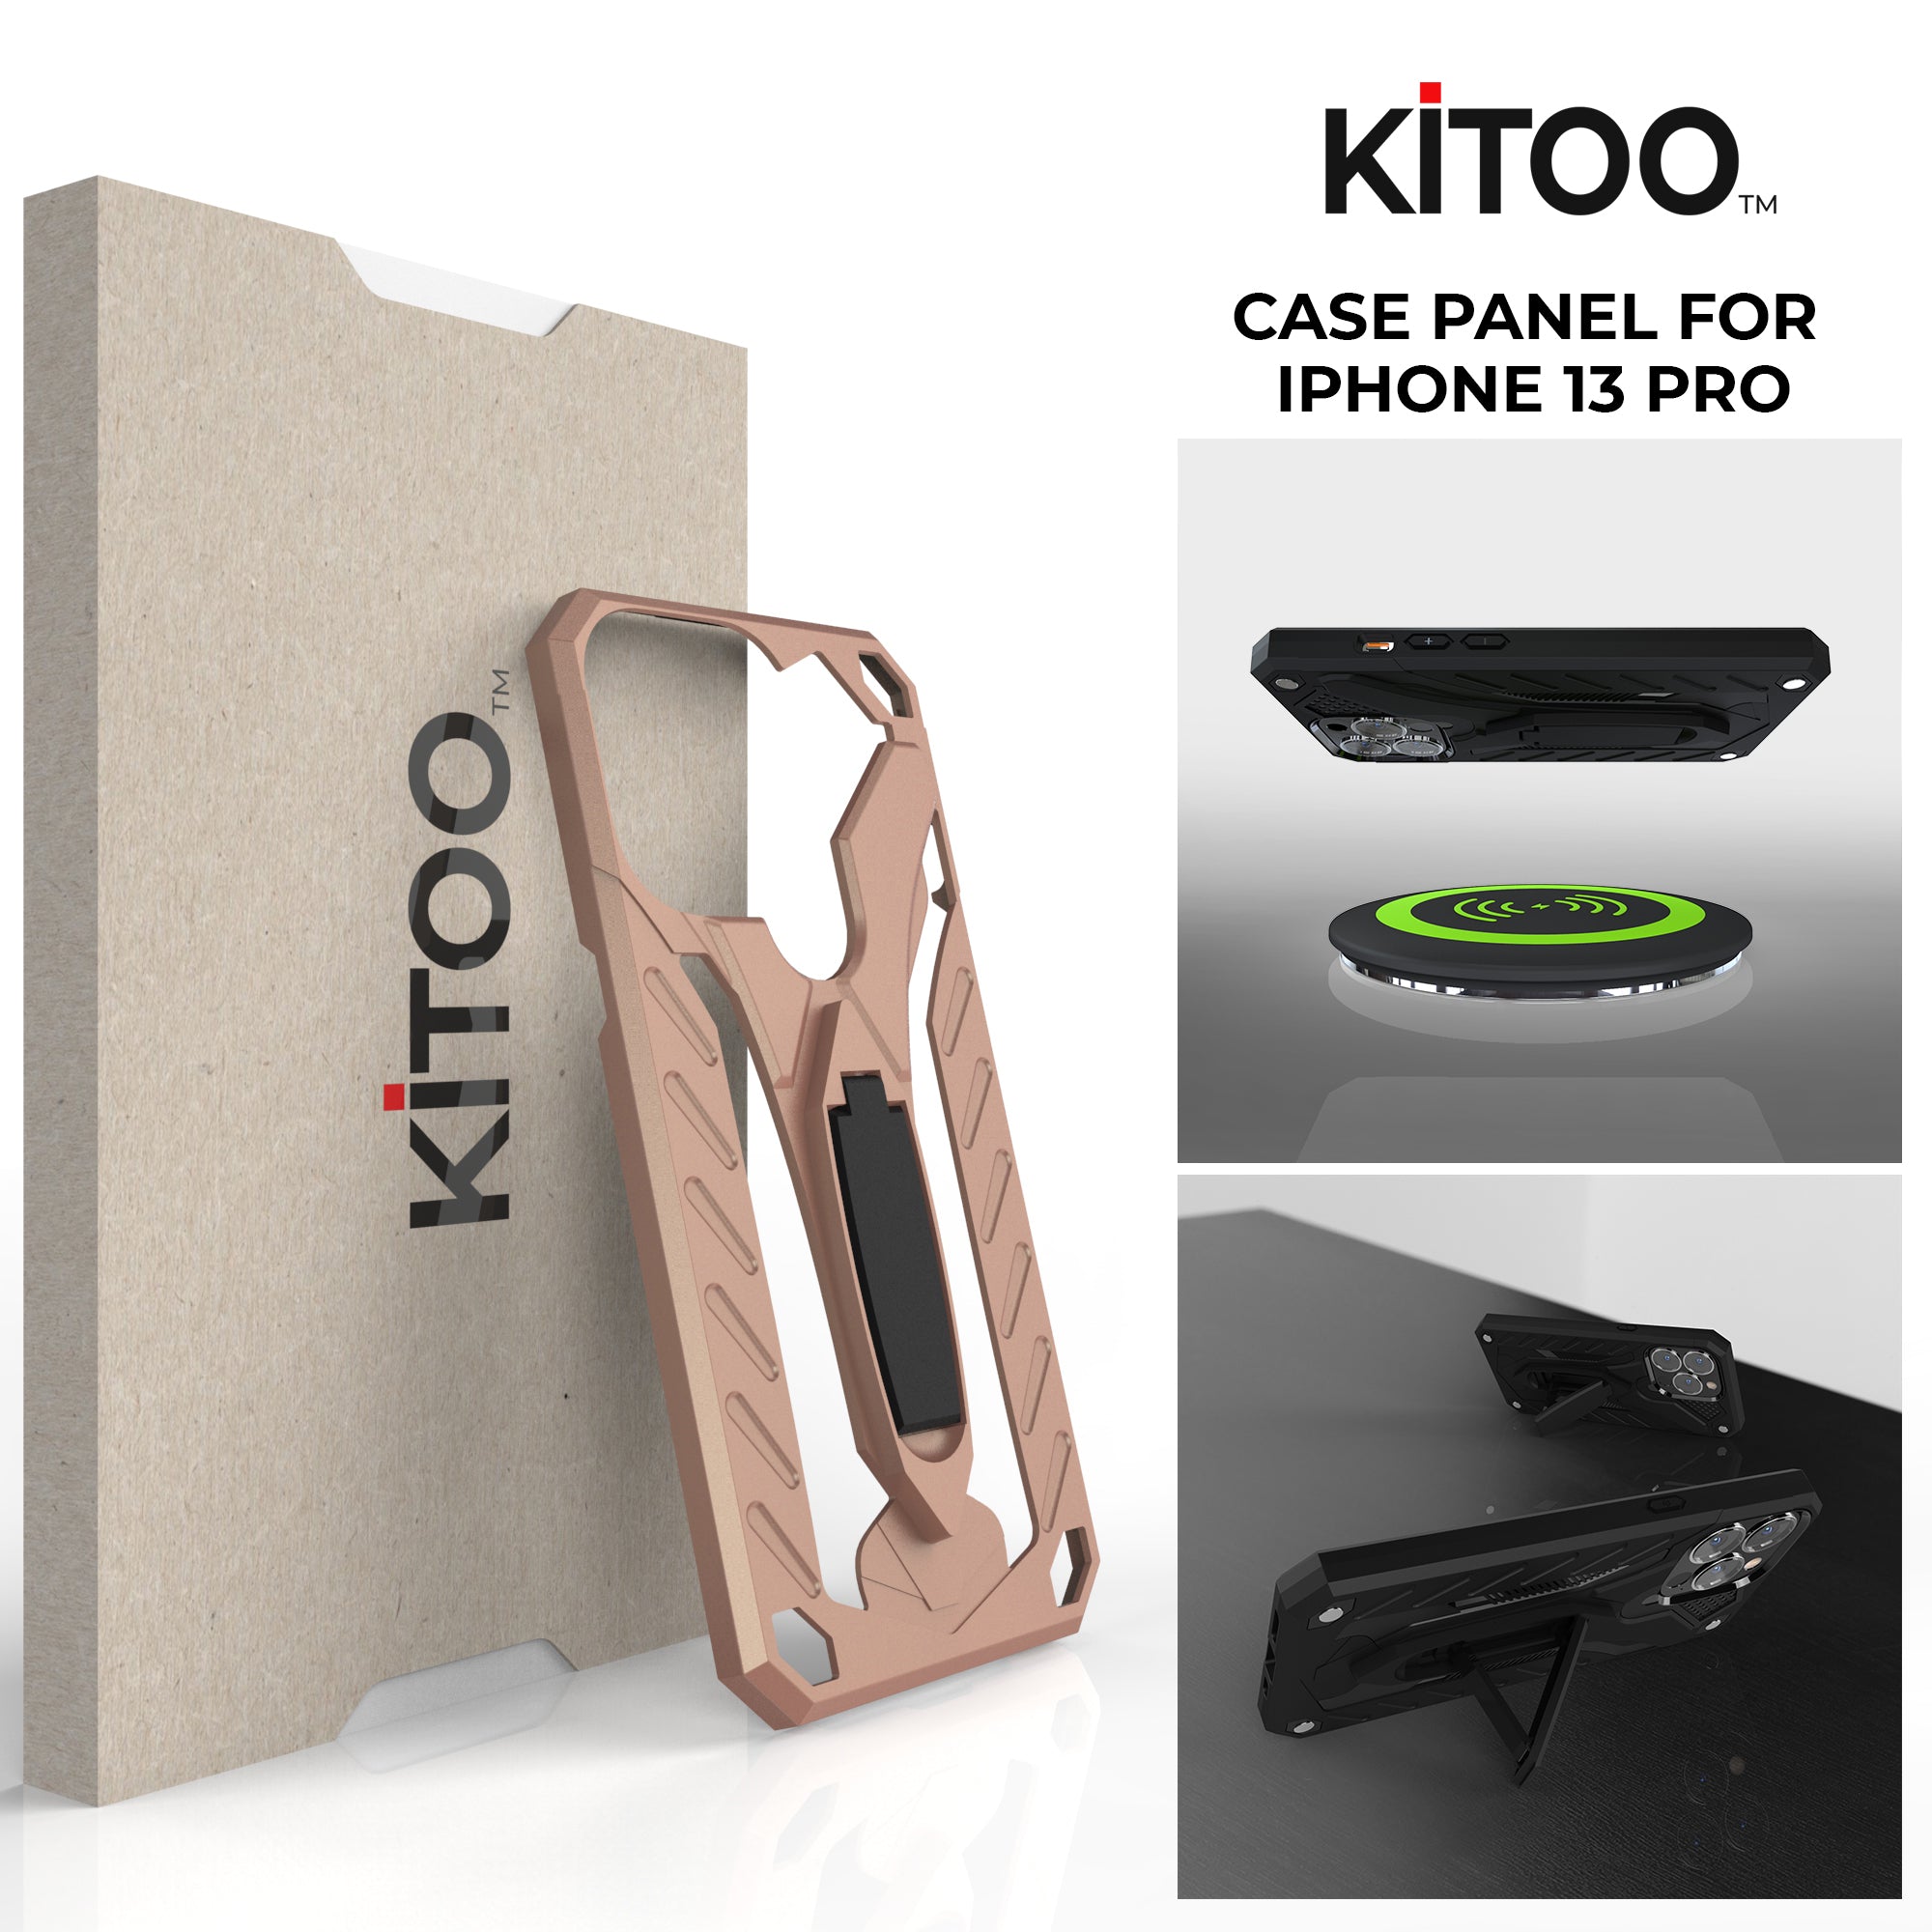 Kitoo Kickstand Panel Designed for iPhone 13 Pro case (Spare Part only) - Rose Golden